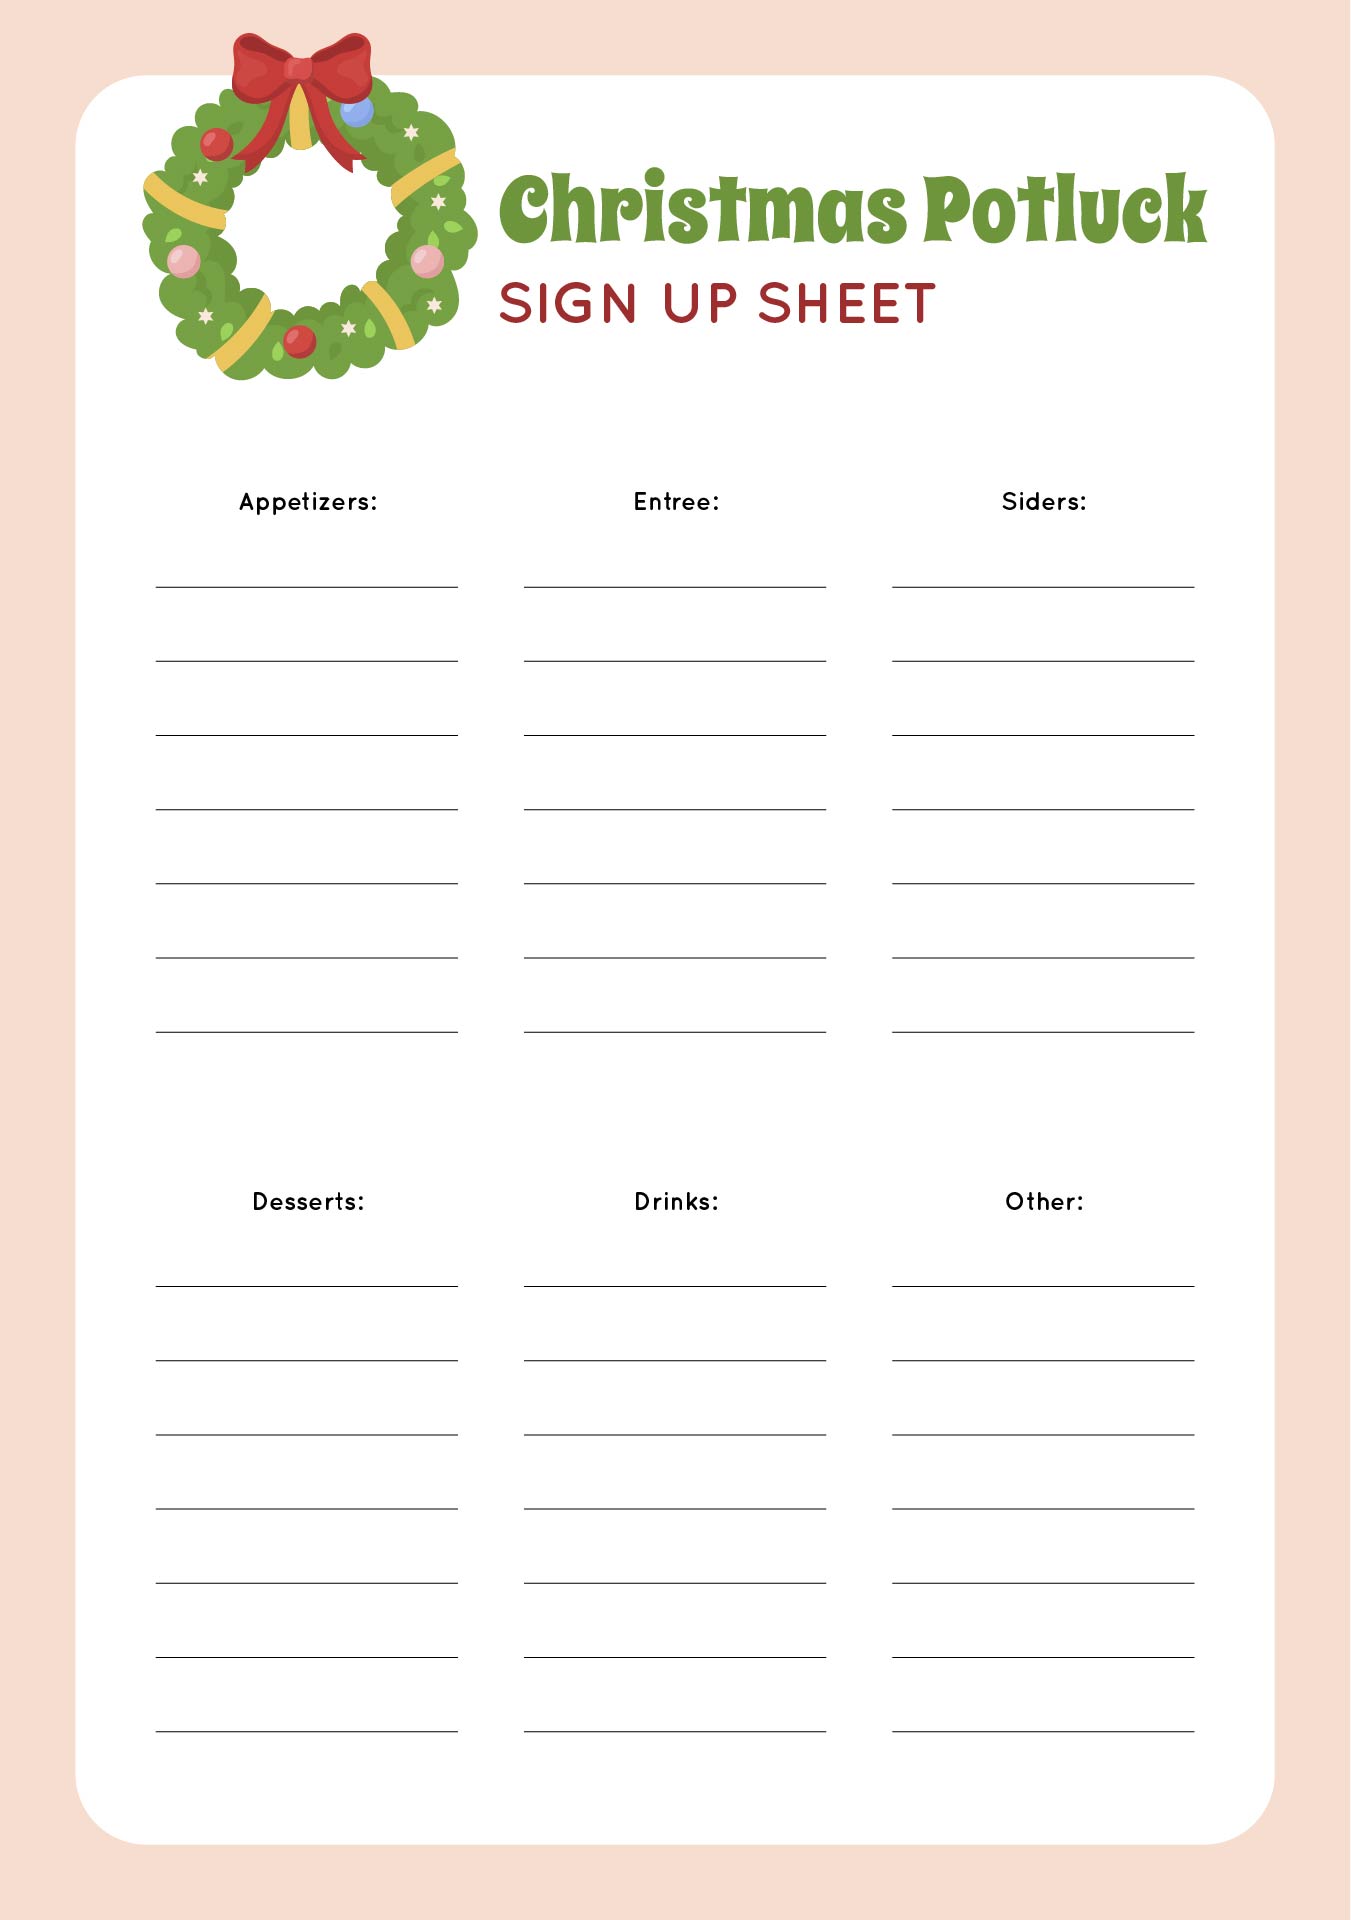 15 Best Christmas Party Printable Sign Up Sheet PDF for Free at Printablee